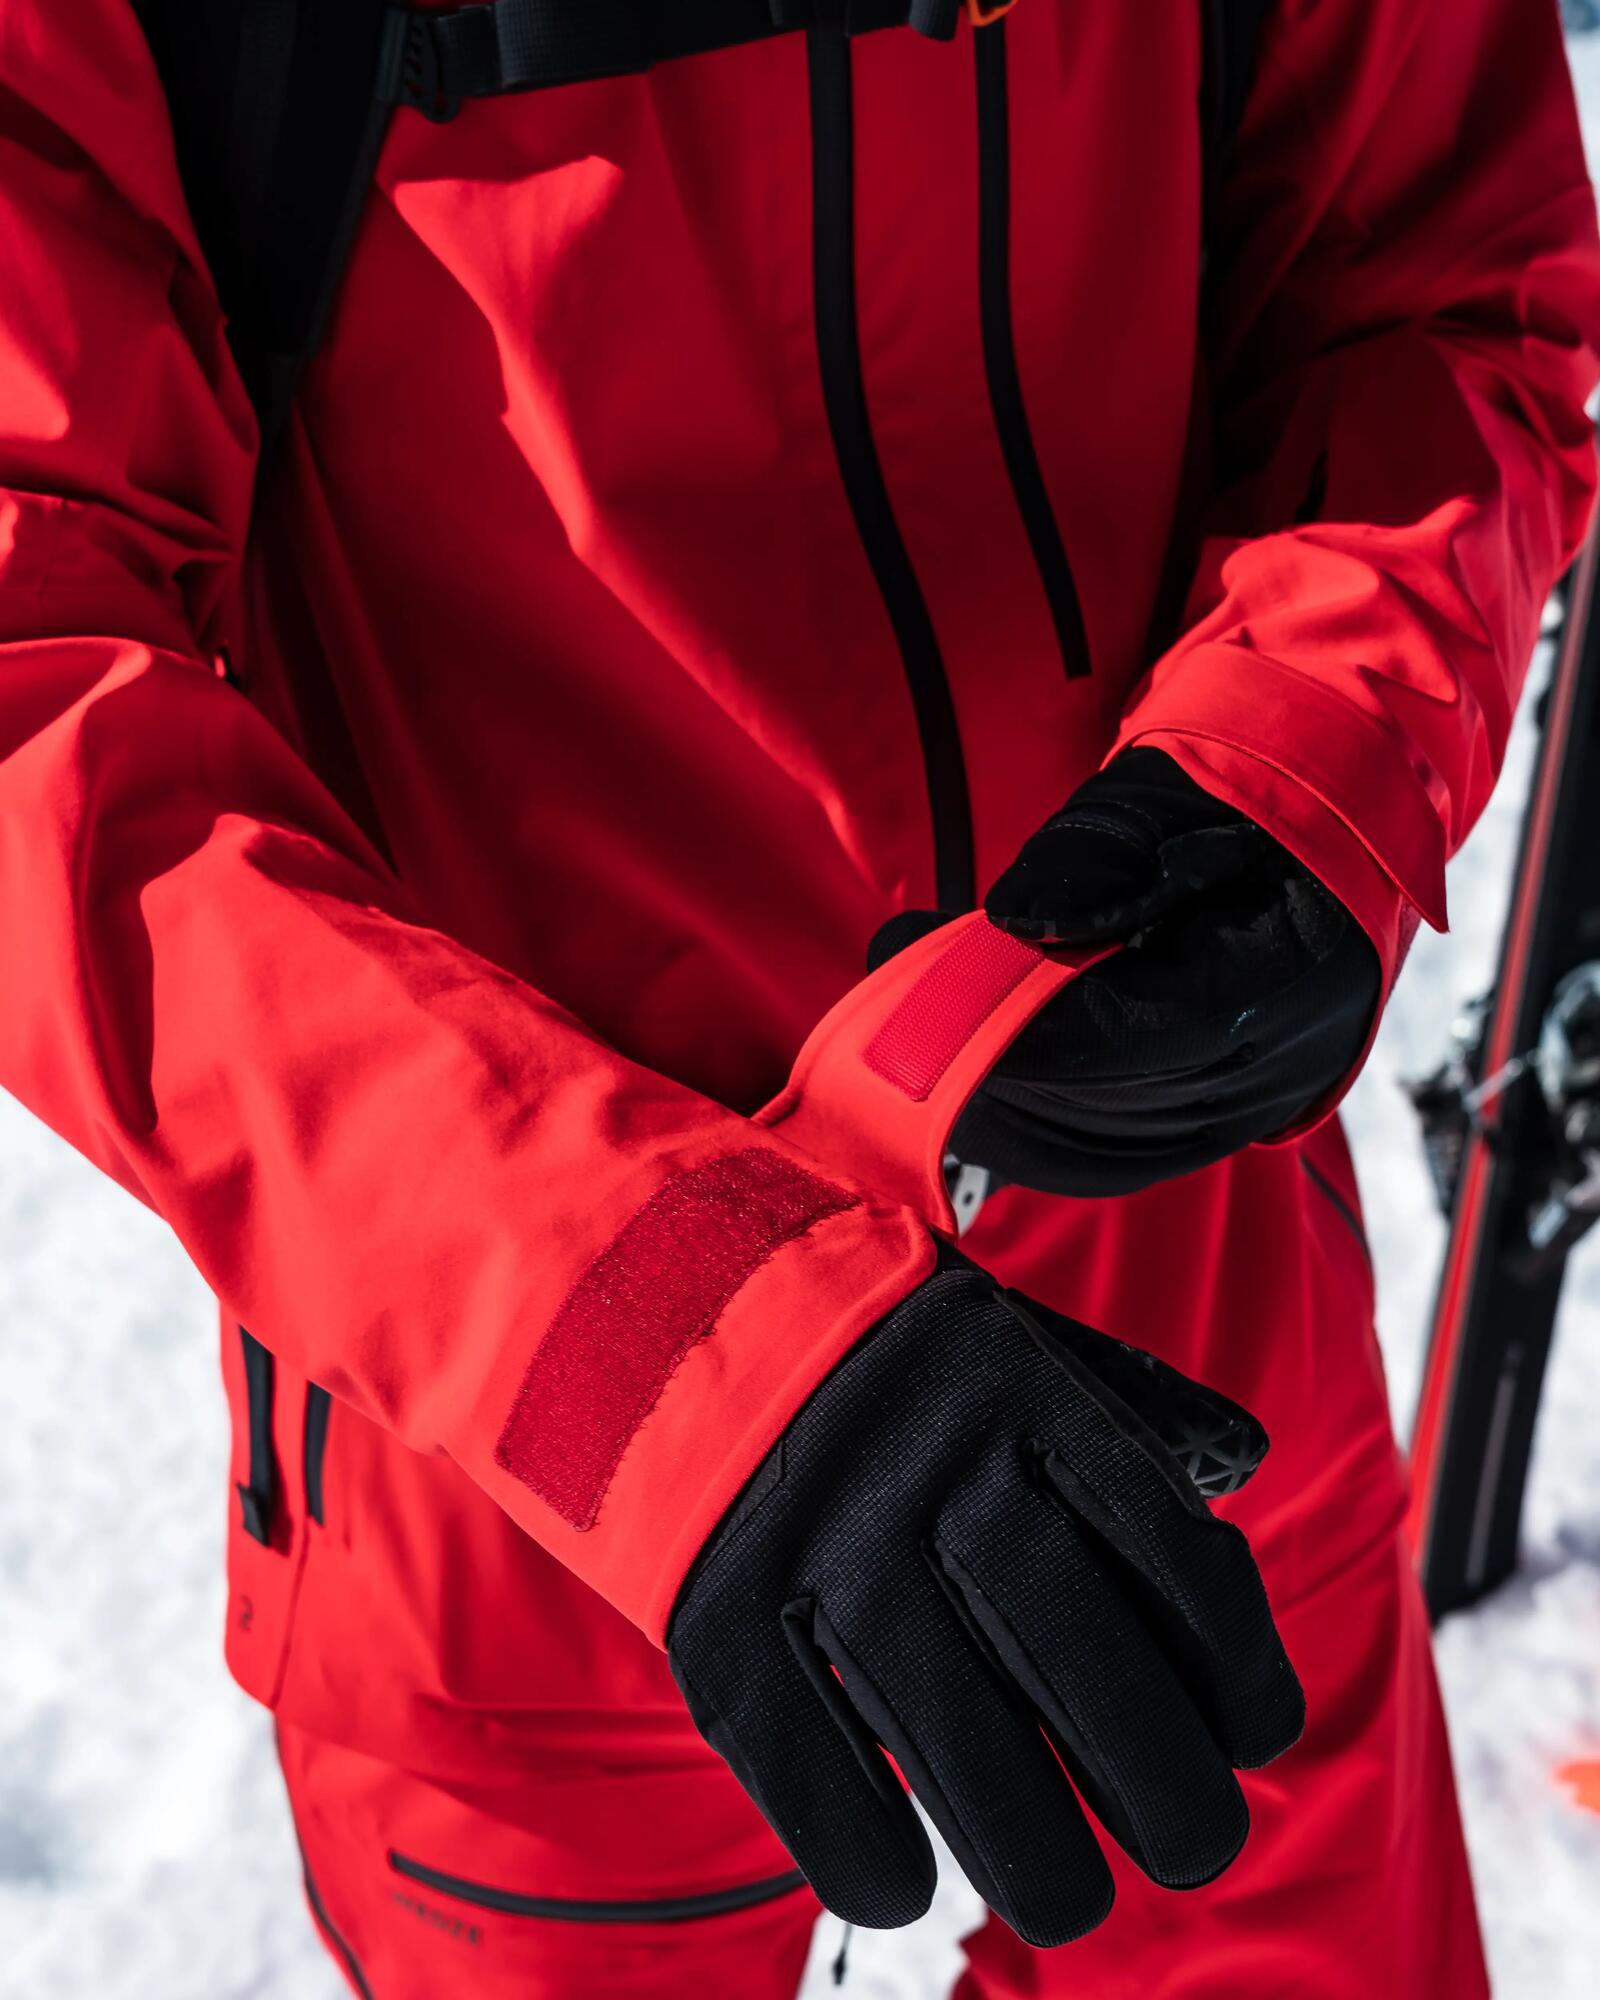 Discover our collection of Ski Jackets